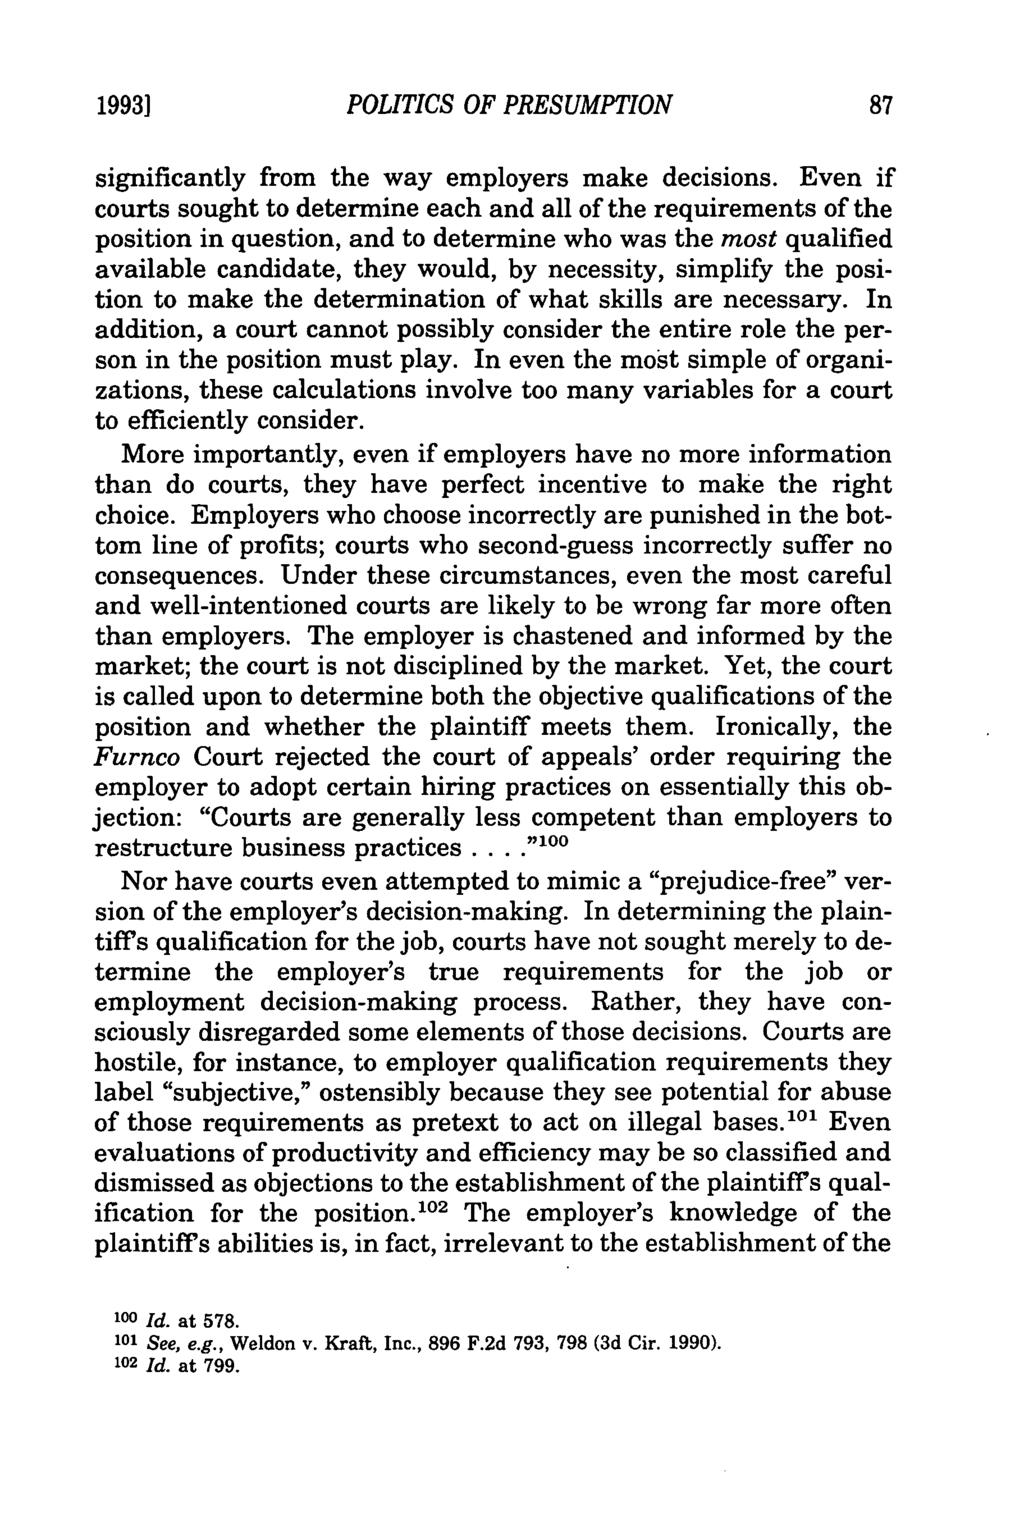 19931 POLITICS OF PRESUMPTION significantly from the way employers make decisions.